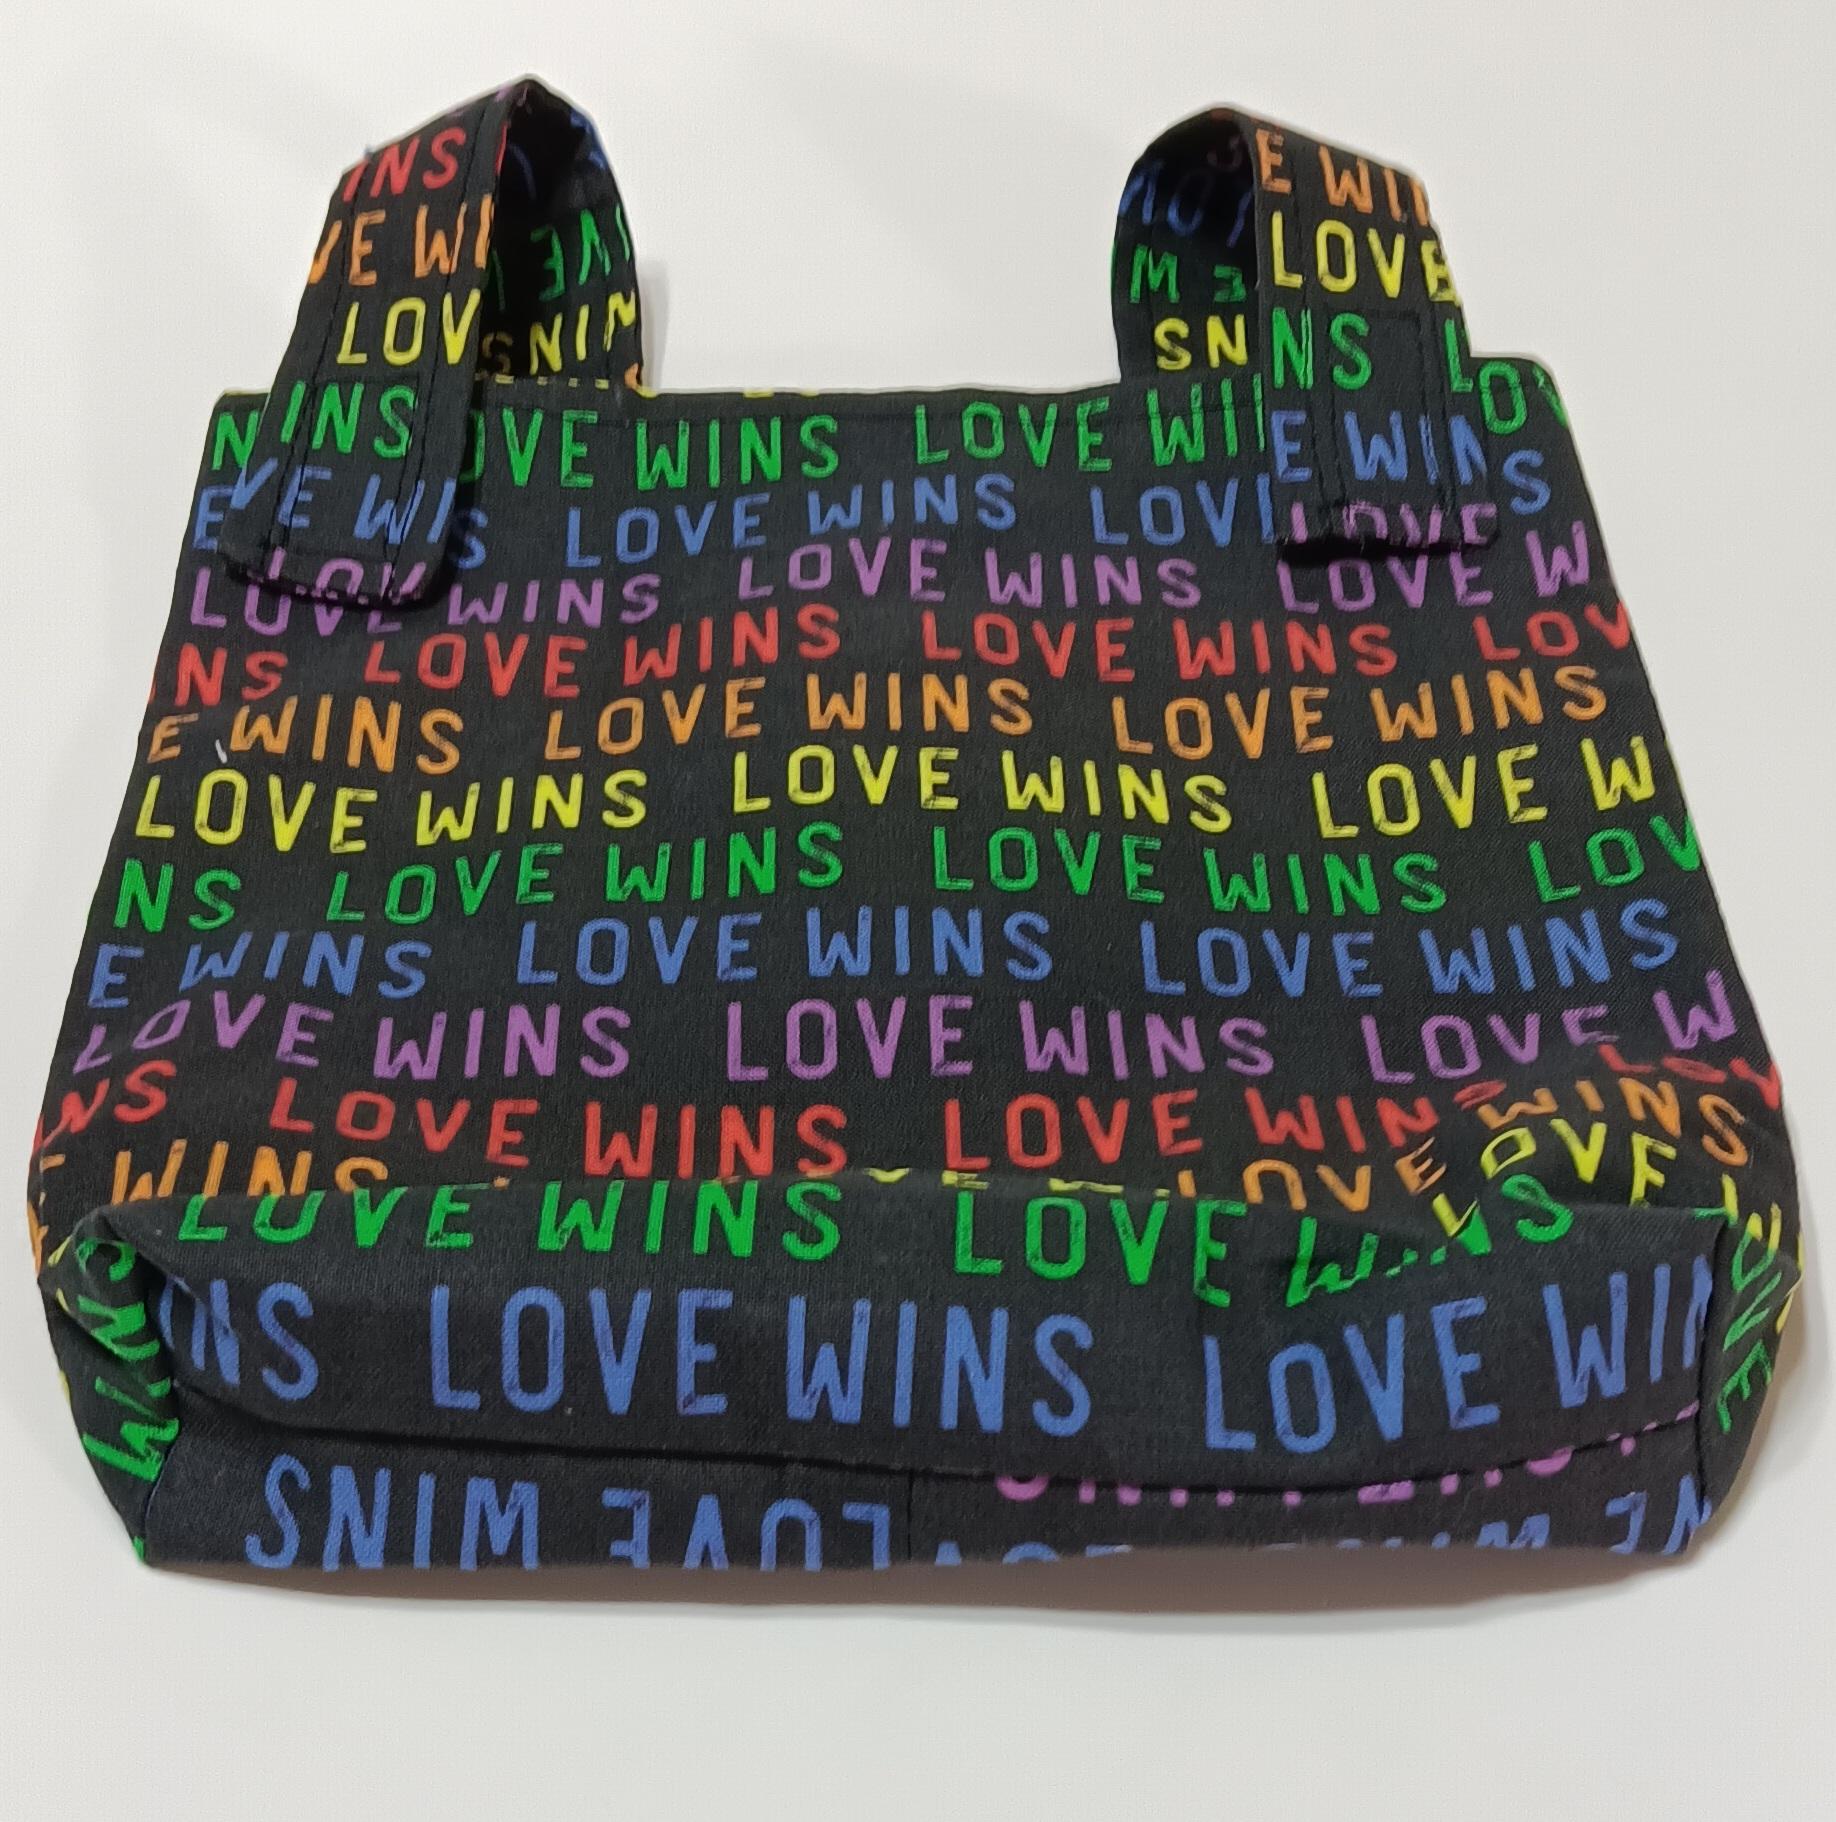 Simple small basic Love Wins bag for crutch, walker, stroller, scooter handlebars, caddy, hook and loop, rainbow & black